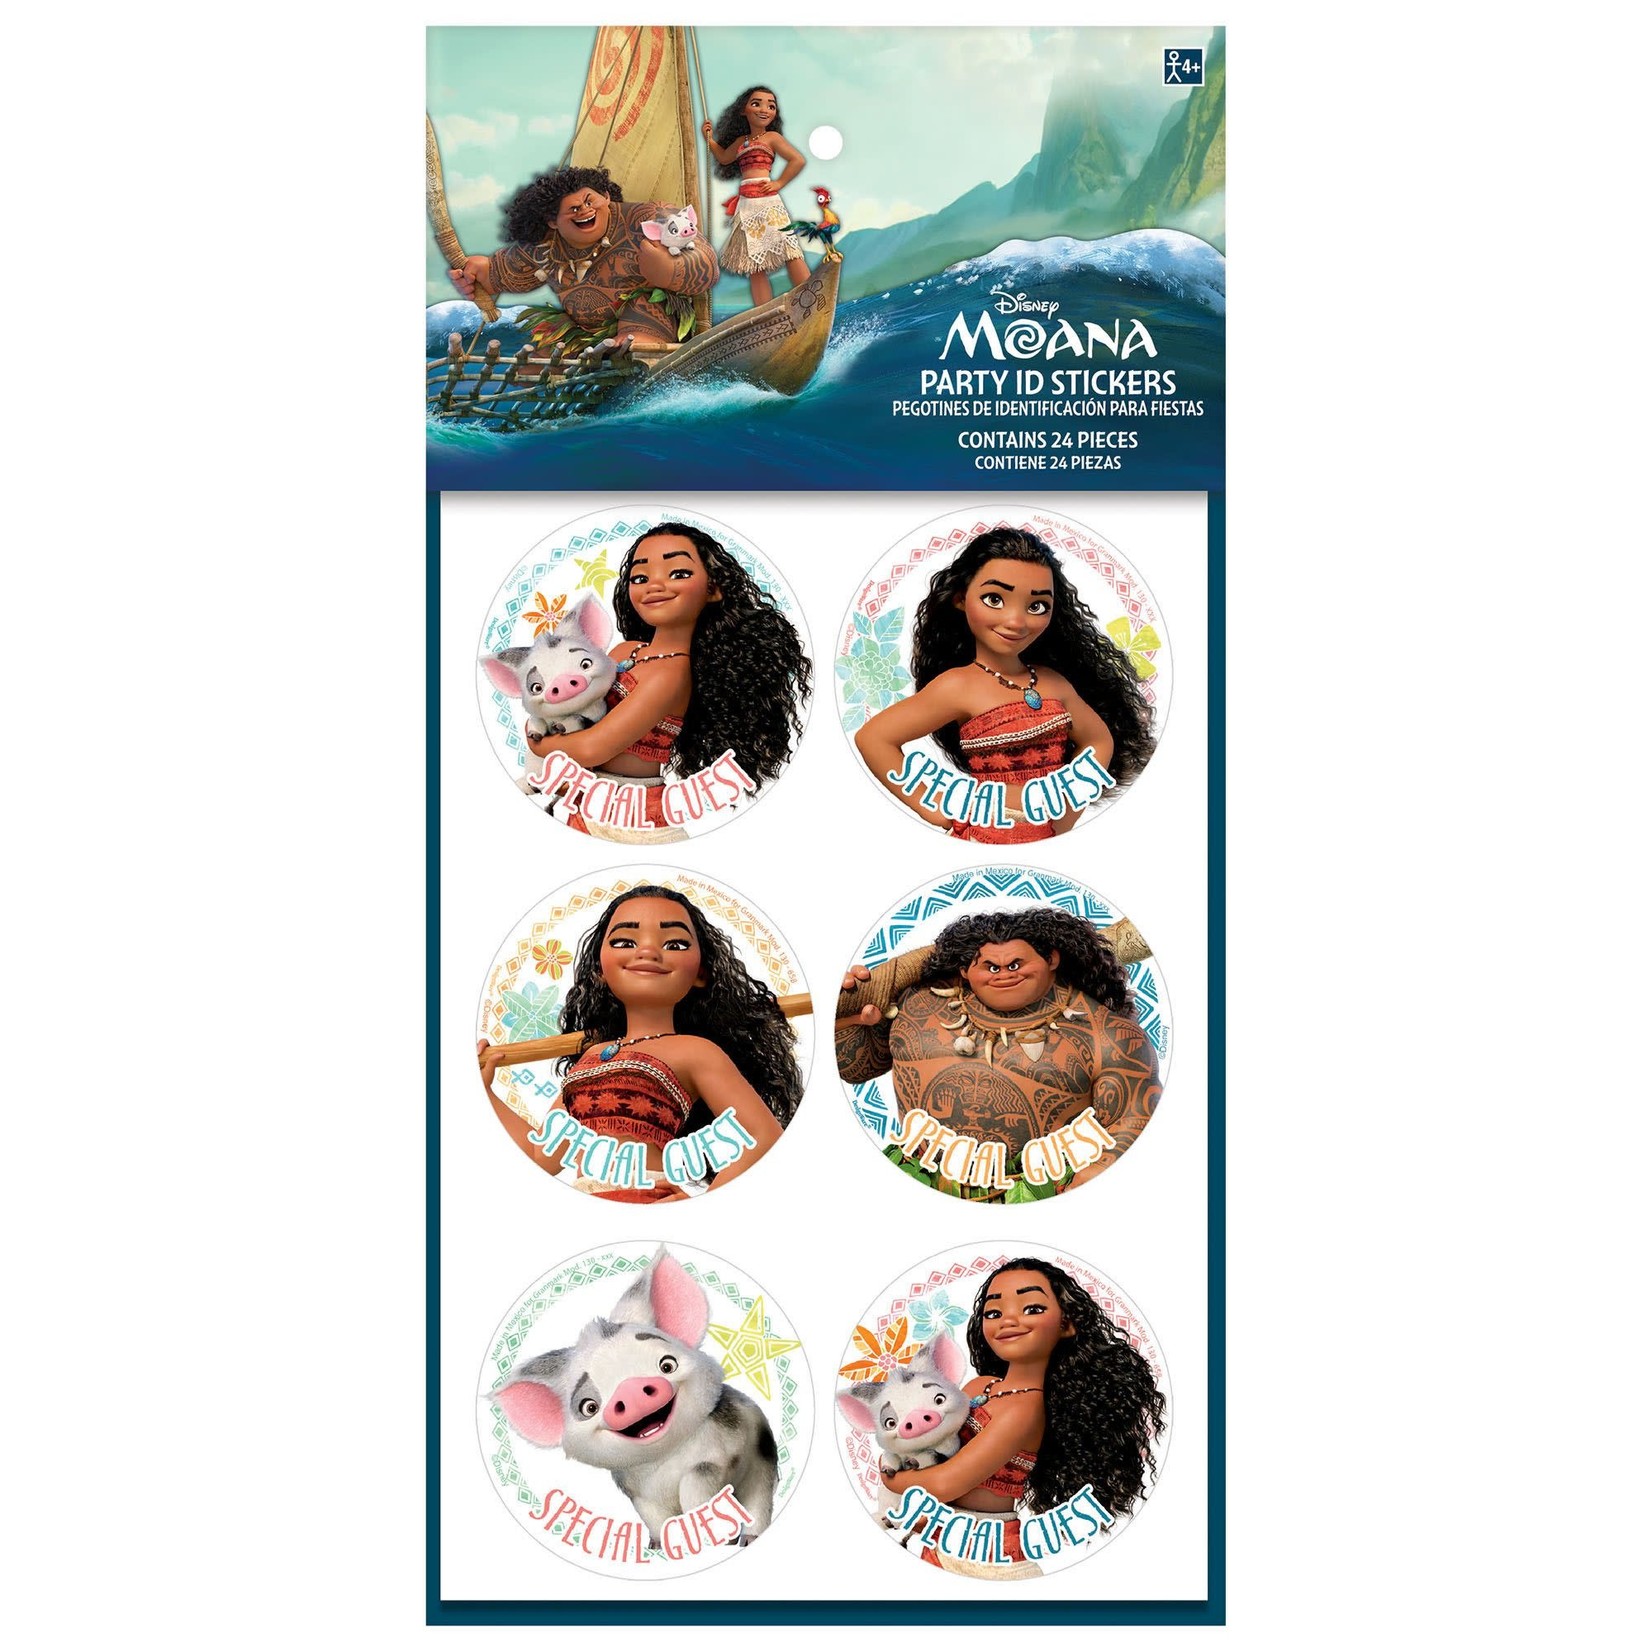 Moana Party ID Stickers 24ct